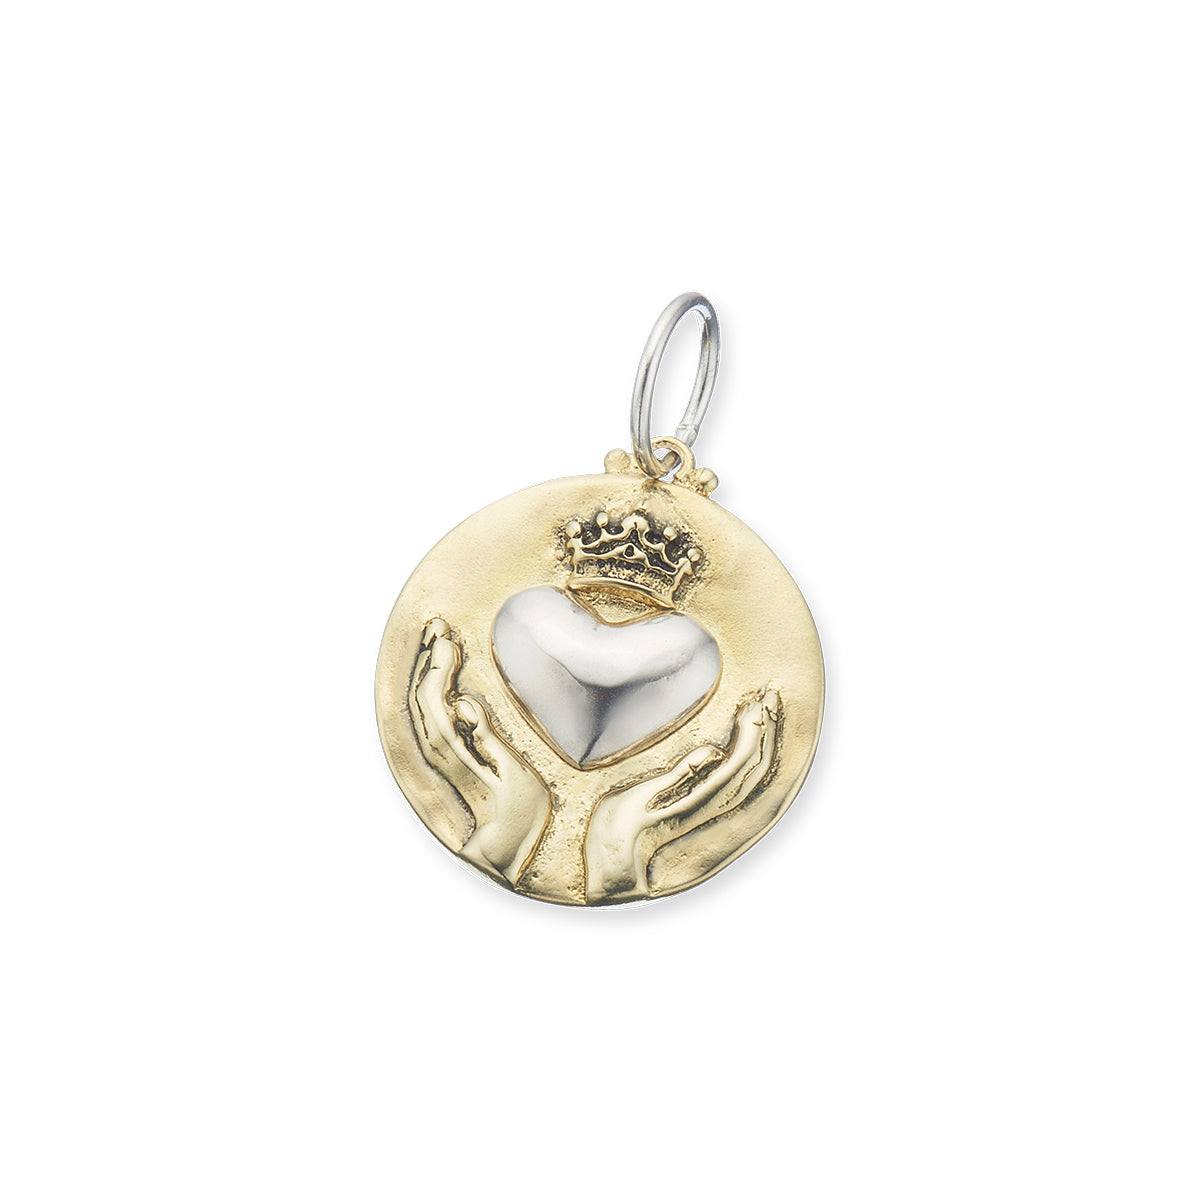 Hands, heart and crown - love & friendship charm